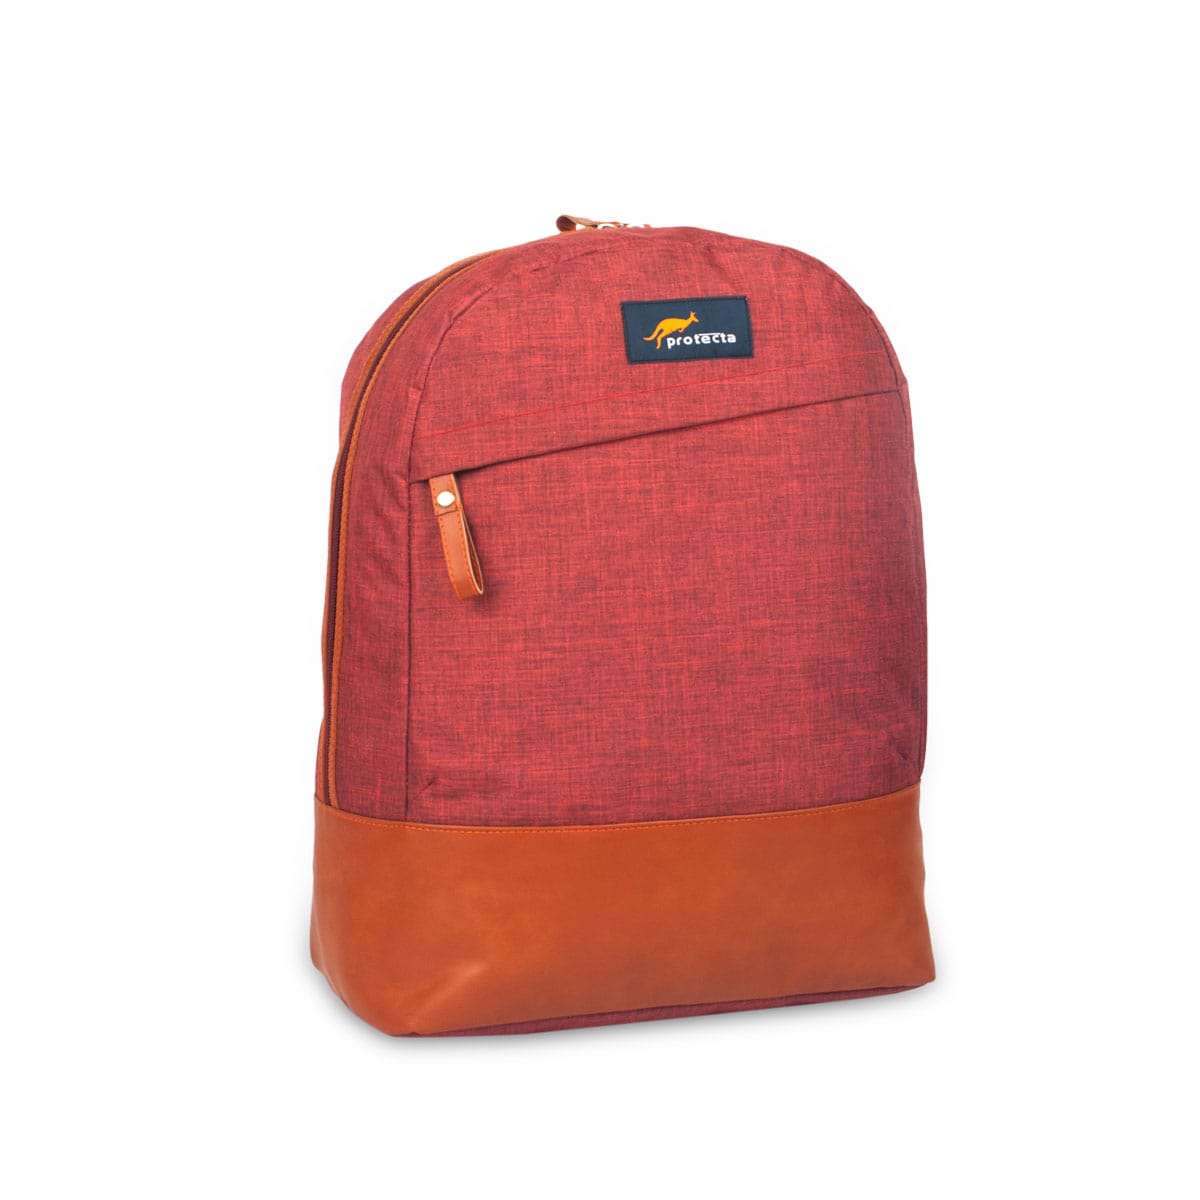 Tan-Rust-Red, Protecta Private Access Casual Backpack-Main